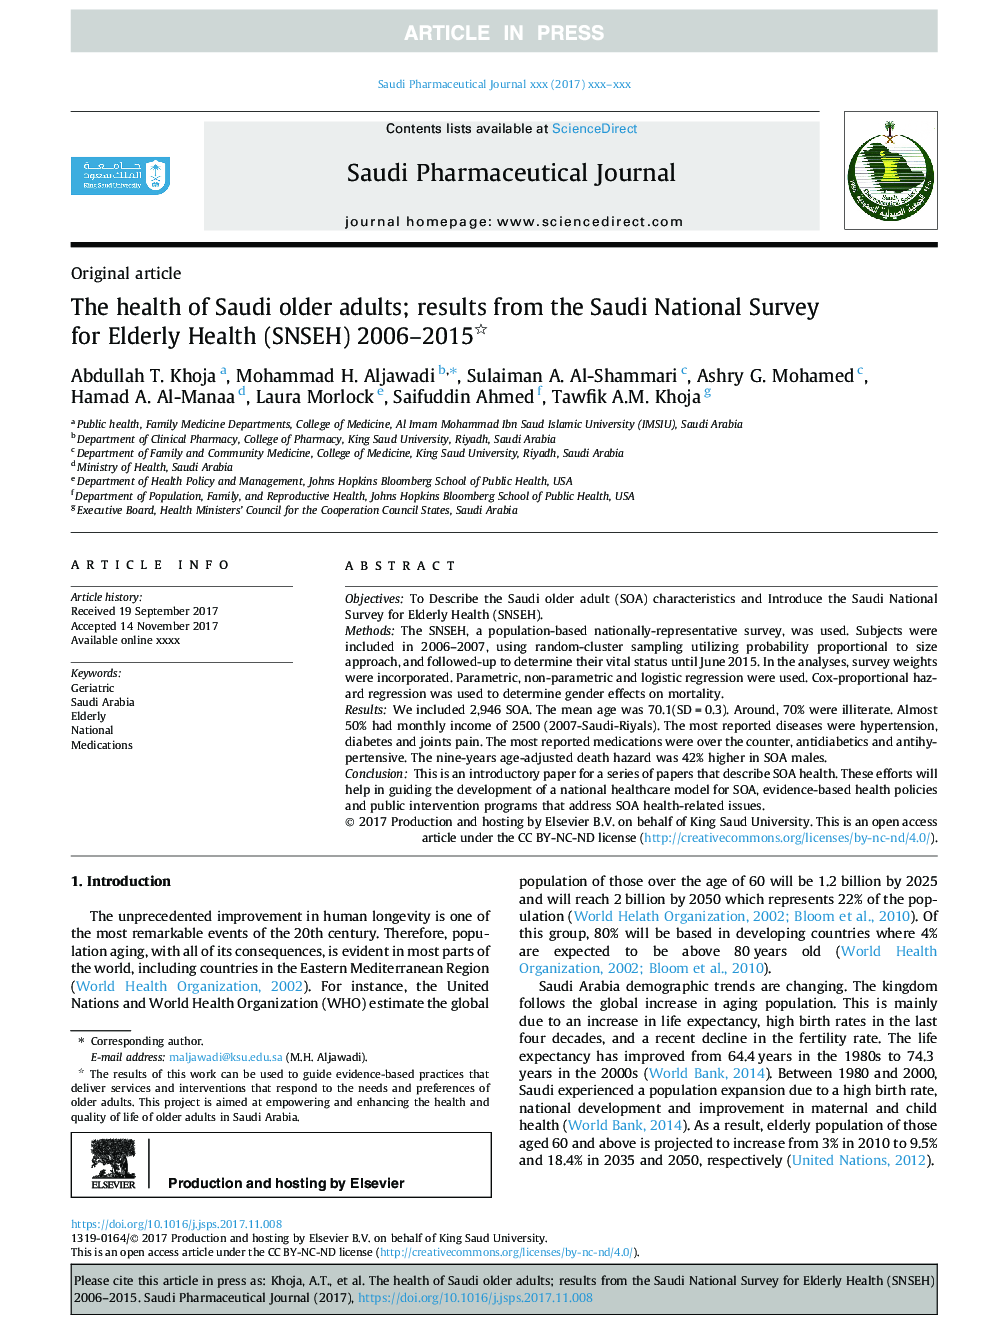 The health of Saudi older adults; results from the Saudi National Survey for Elderly Health (SNSEH) 2006-2015